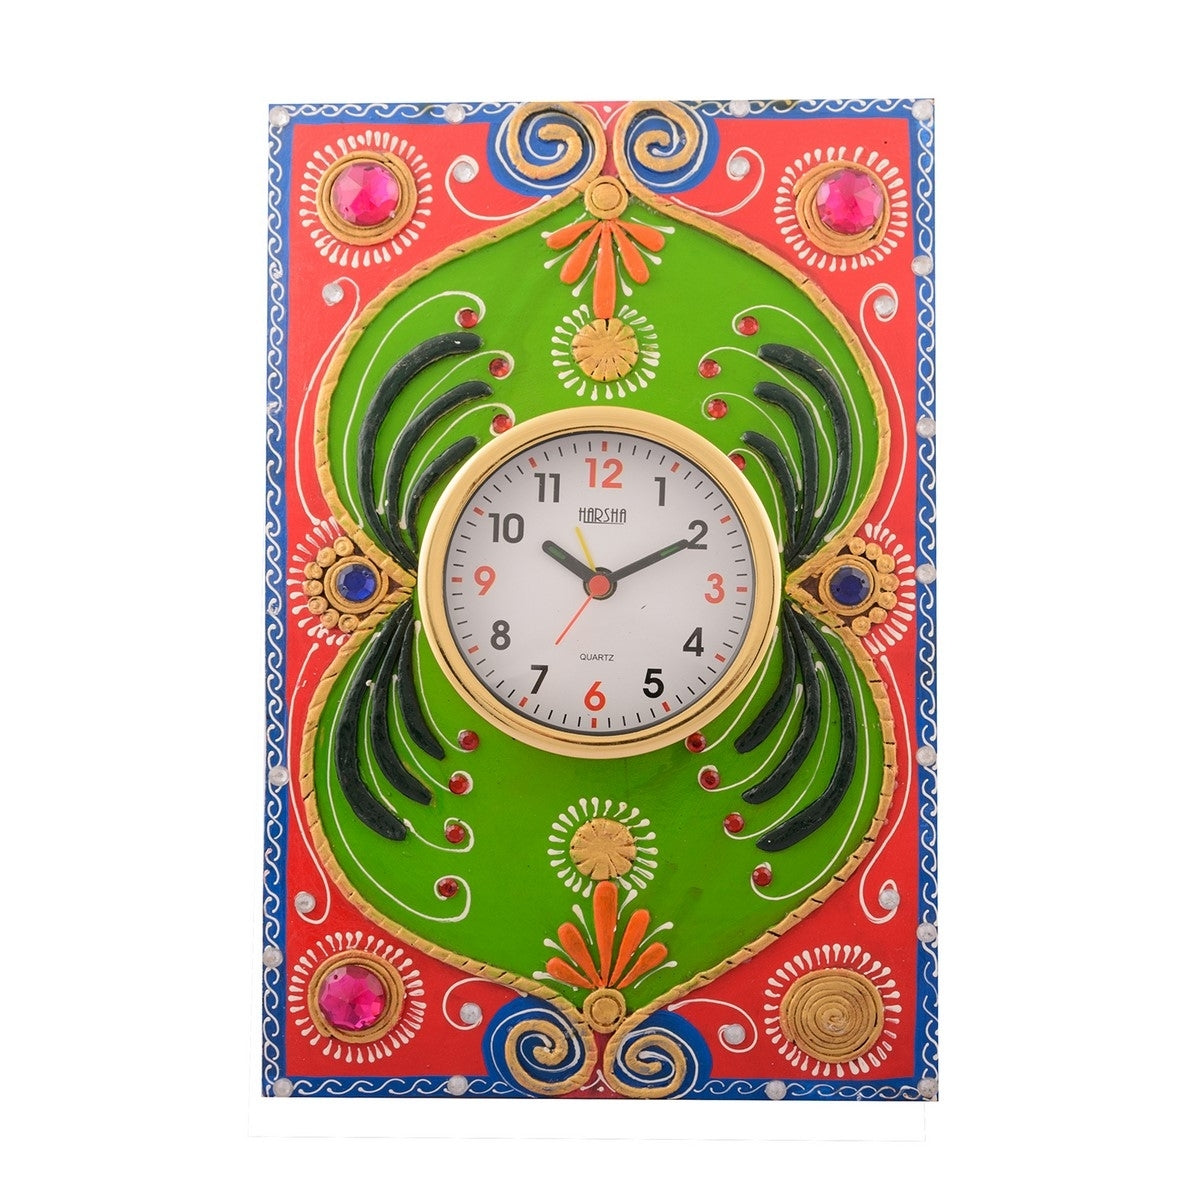 Wooden Papier Mache Embossed Artistic Handcrafted Wall Clock